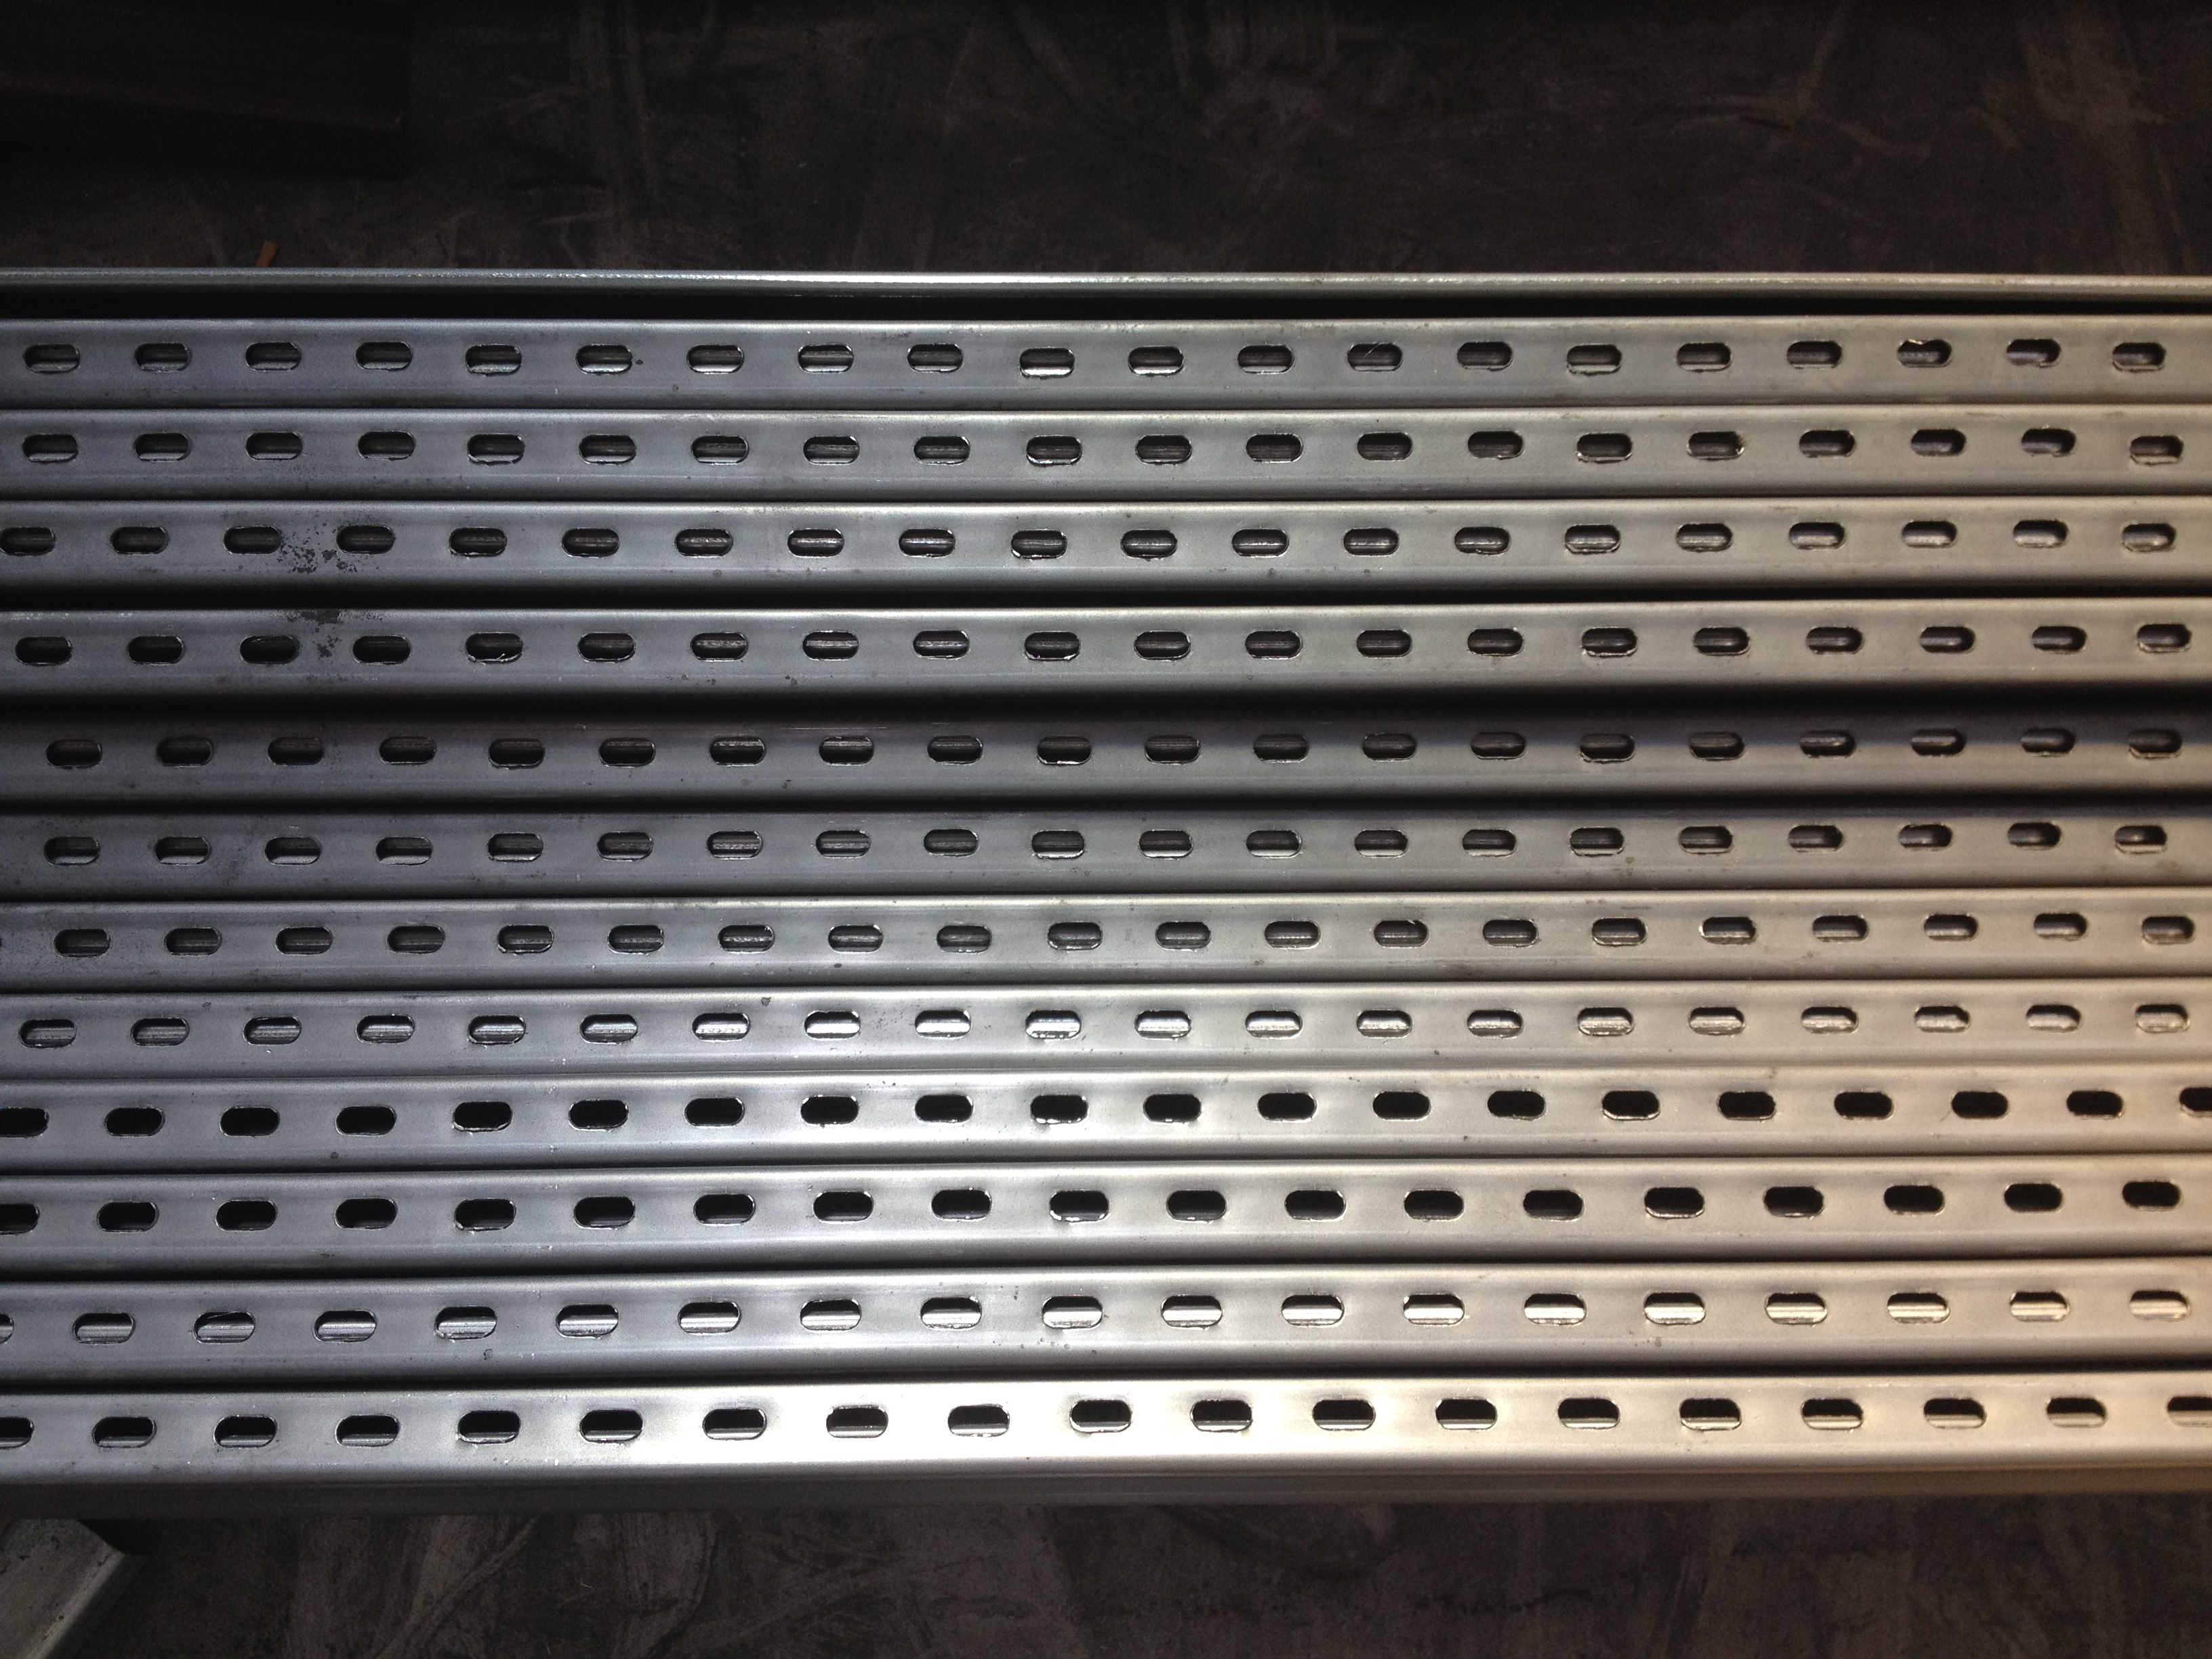 Steel  C  Purlins Used for Photovoltaic  Bracket